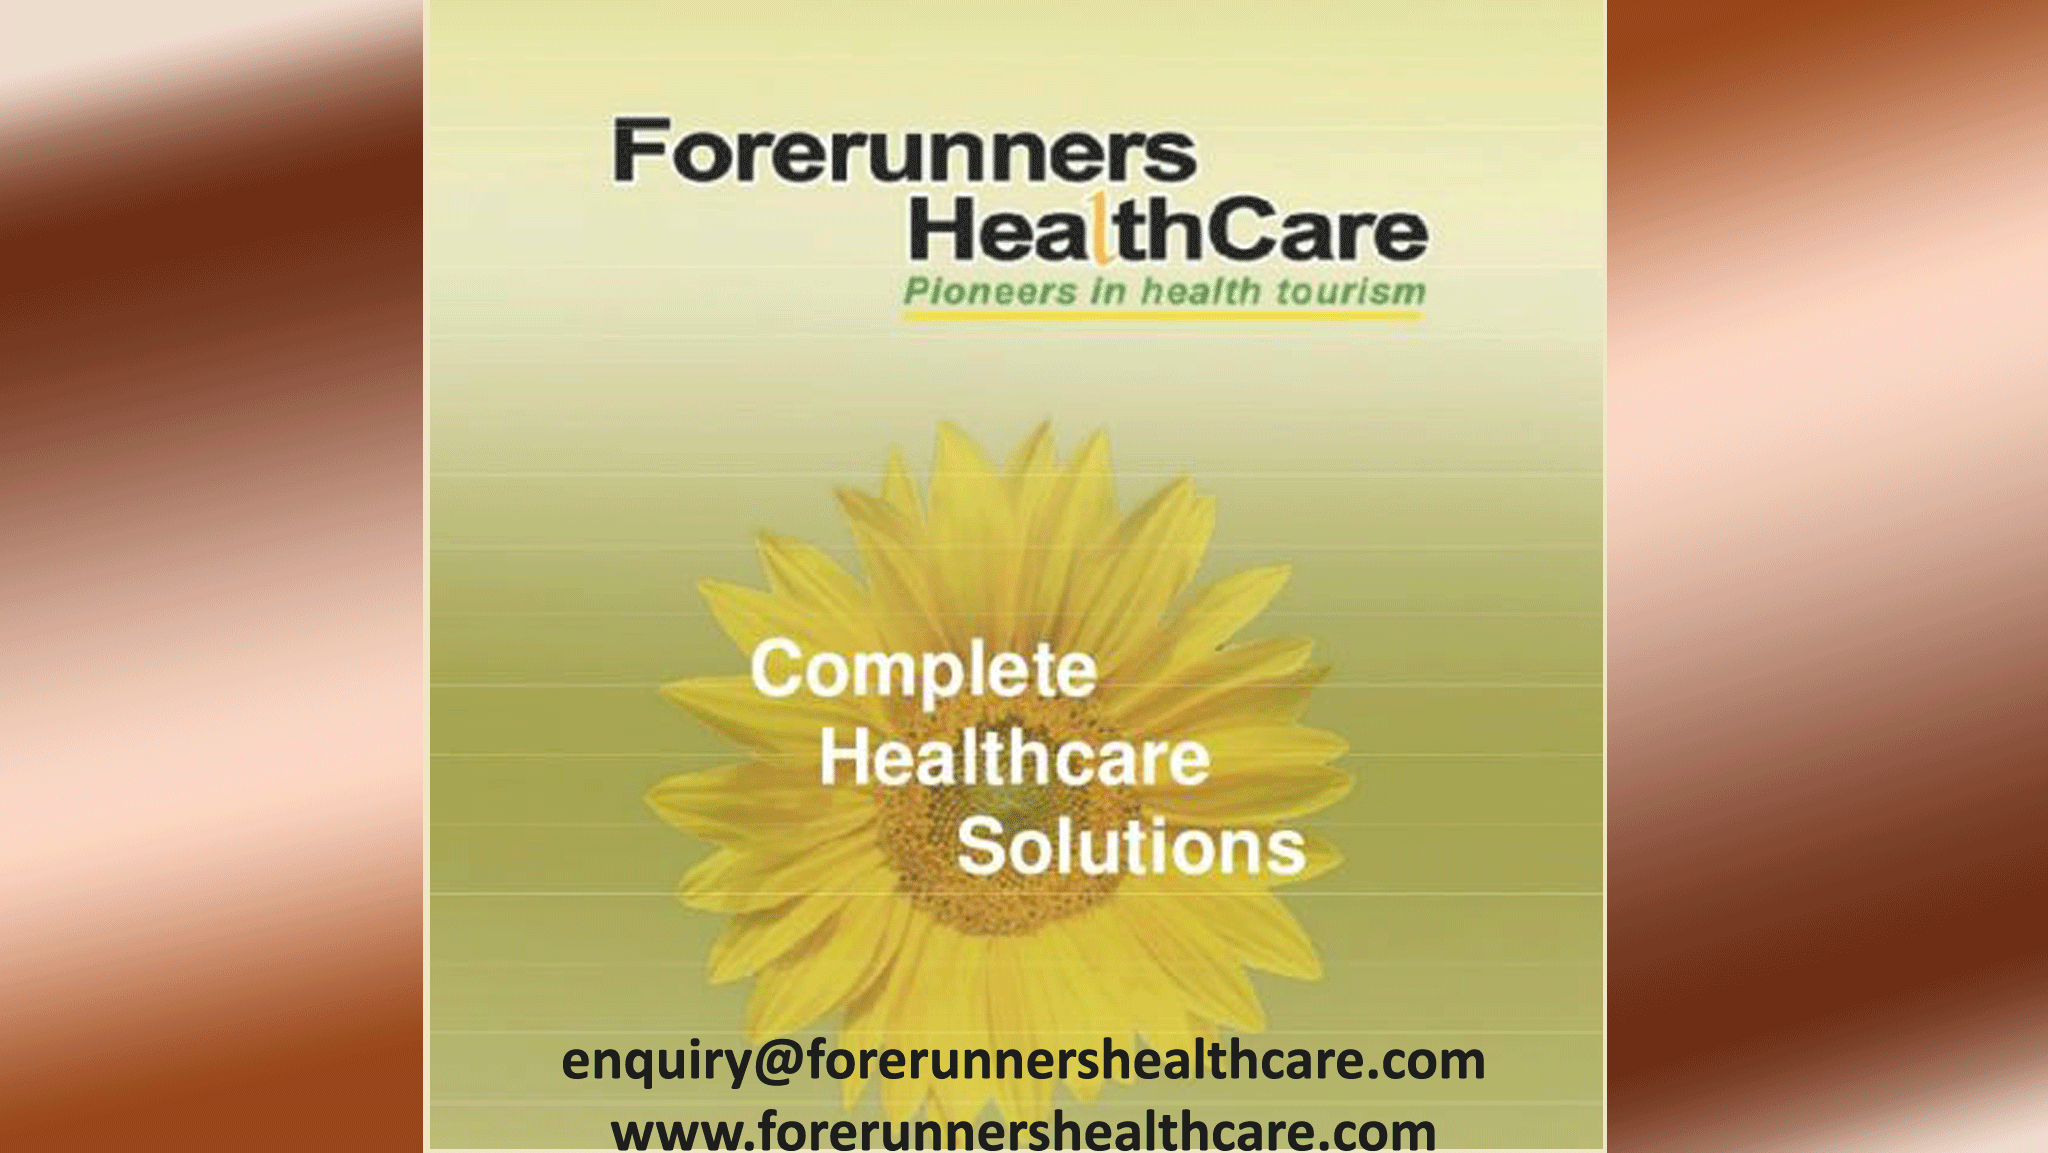 FORERUNNERS HEALTHCARE CONSULTANTS

For More details visit our official website: www.forerunnershealthcare.com , 

Email :- enquiry@forerunnershealthcare.com , 

Phone Numbers Reach Us-
India & International : +91-9860755000 / +91-9371136499, 
UK : +44-2081332571 , 
Canada & USA : +1-4155992537 , 
NIGERIA      : +234-17101094